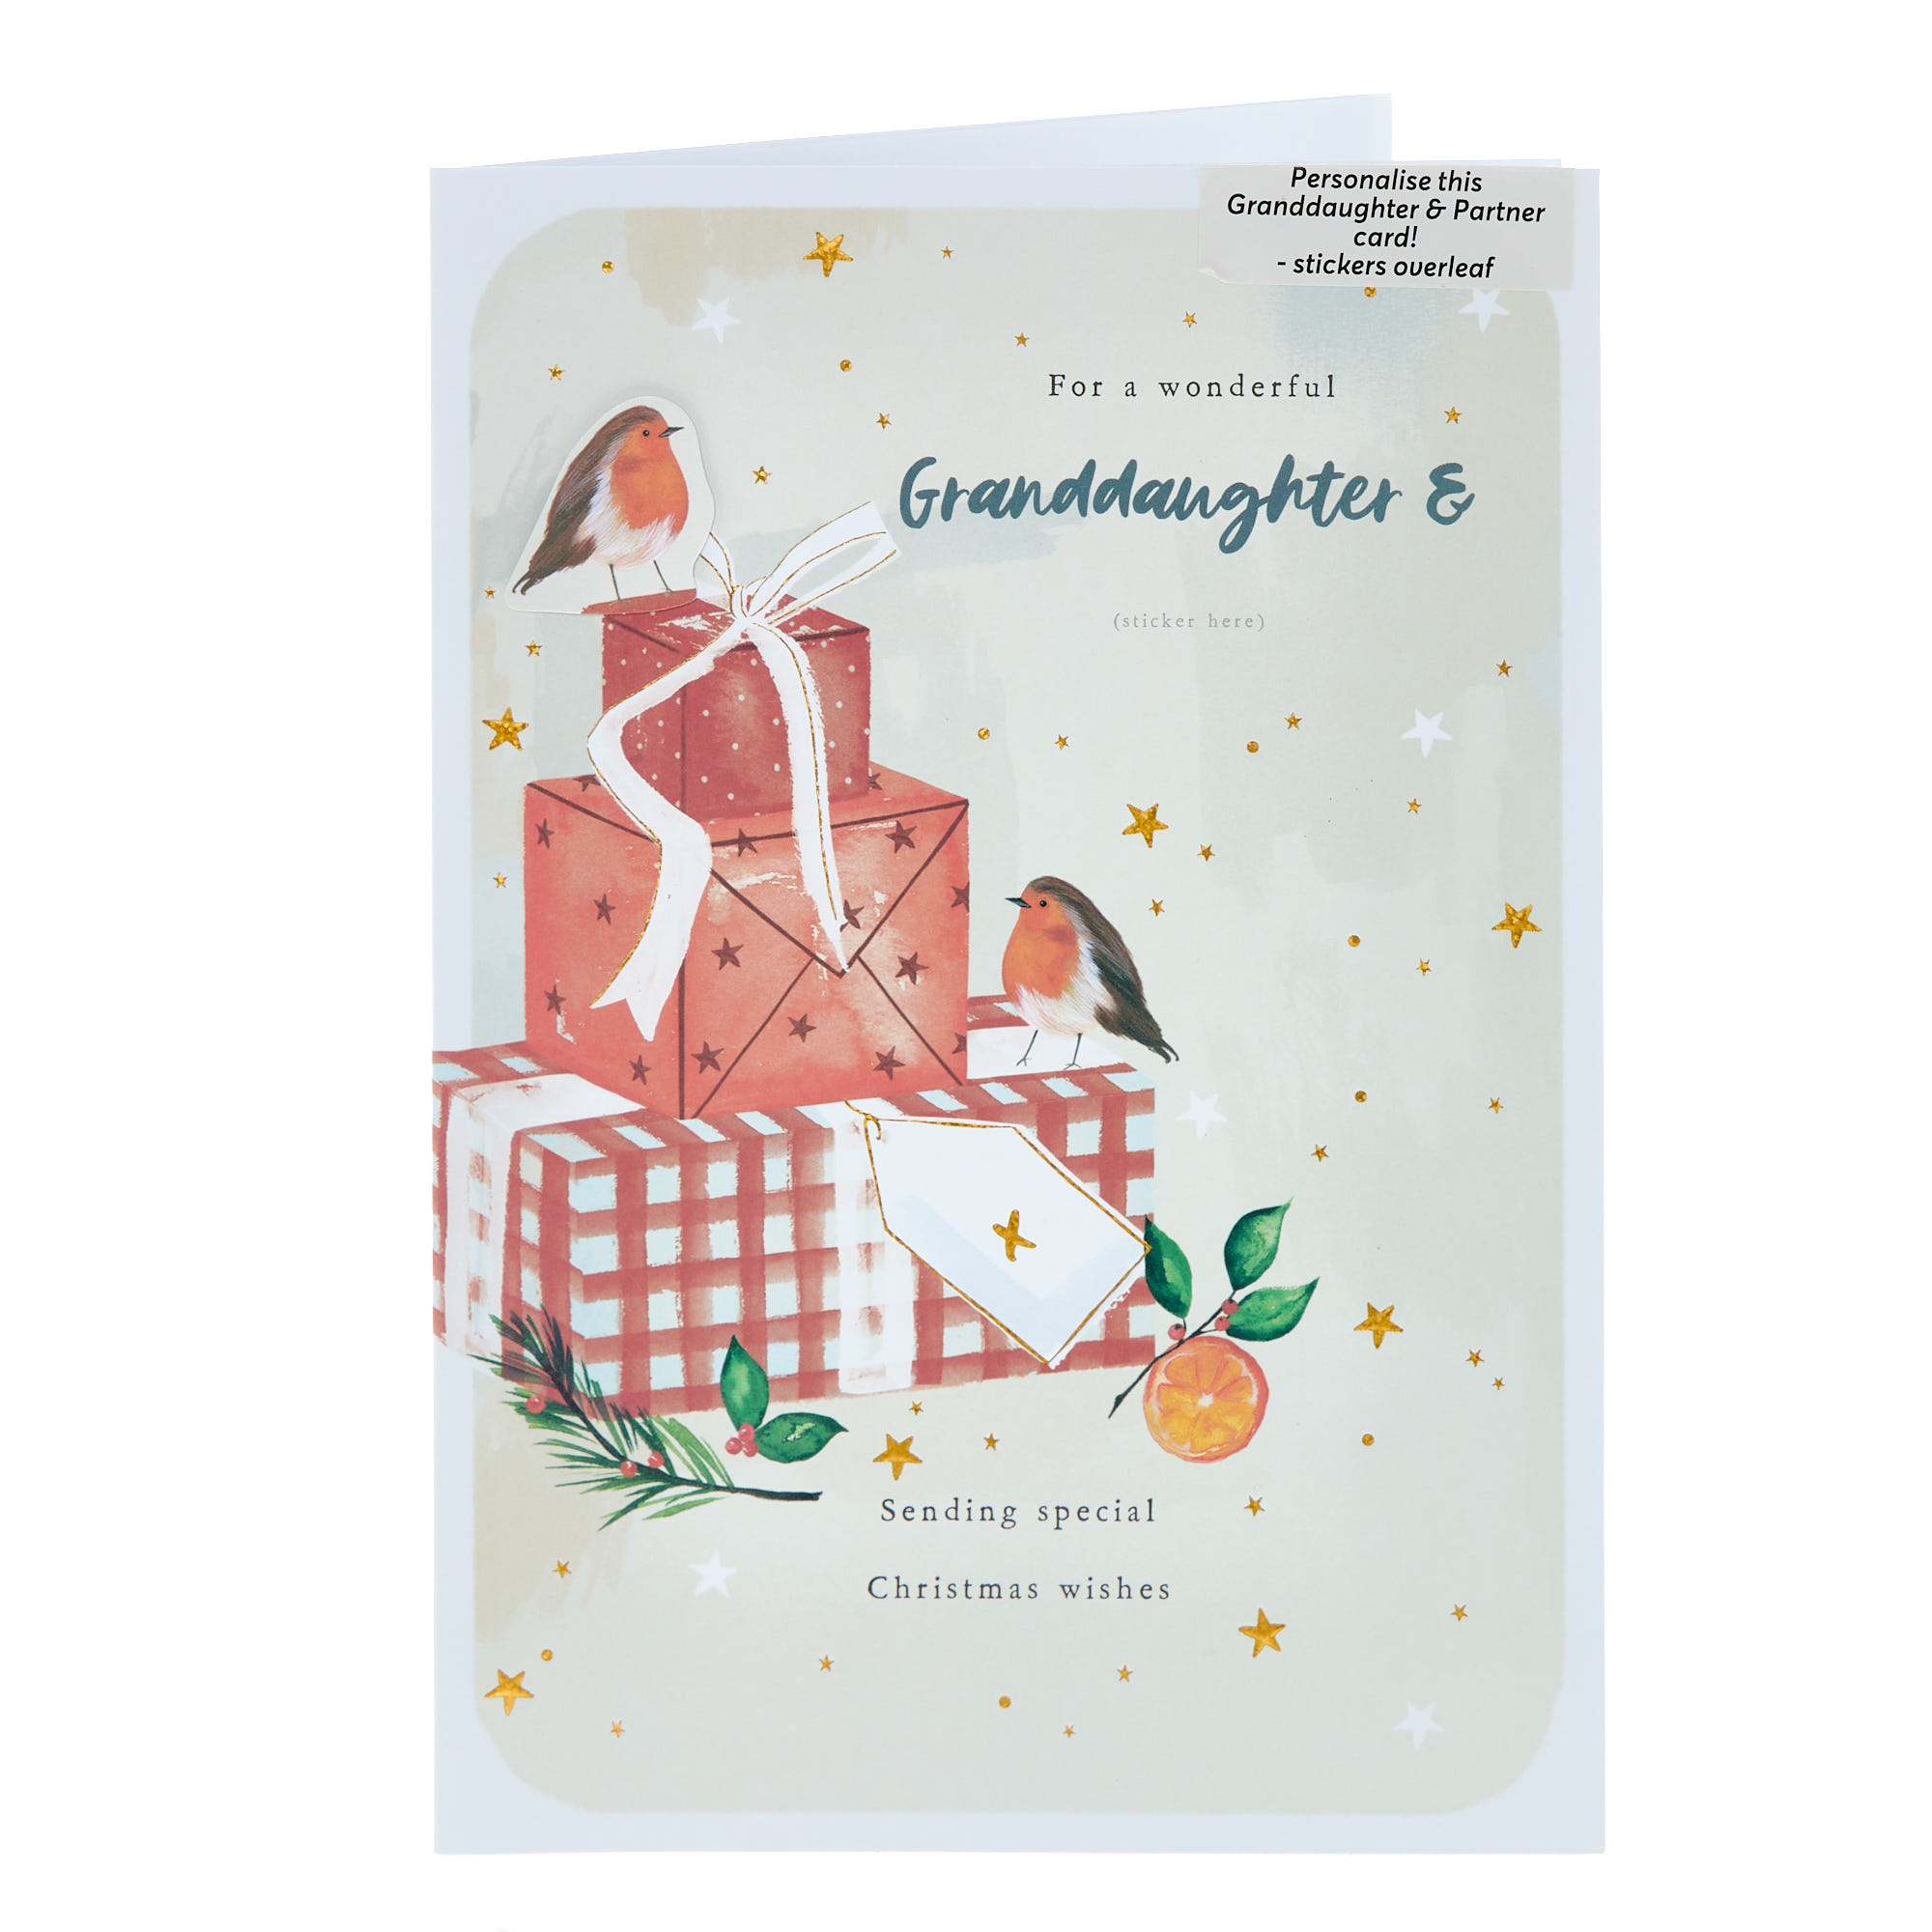 Granddaughter & Partner Christmas Card (With Recipient Stickers)